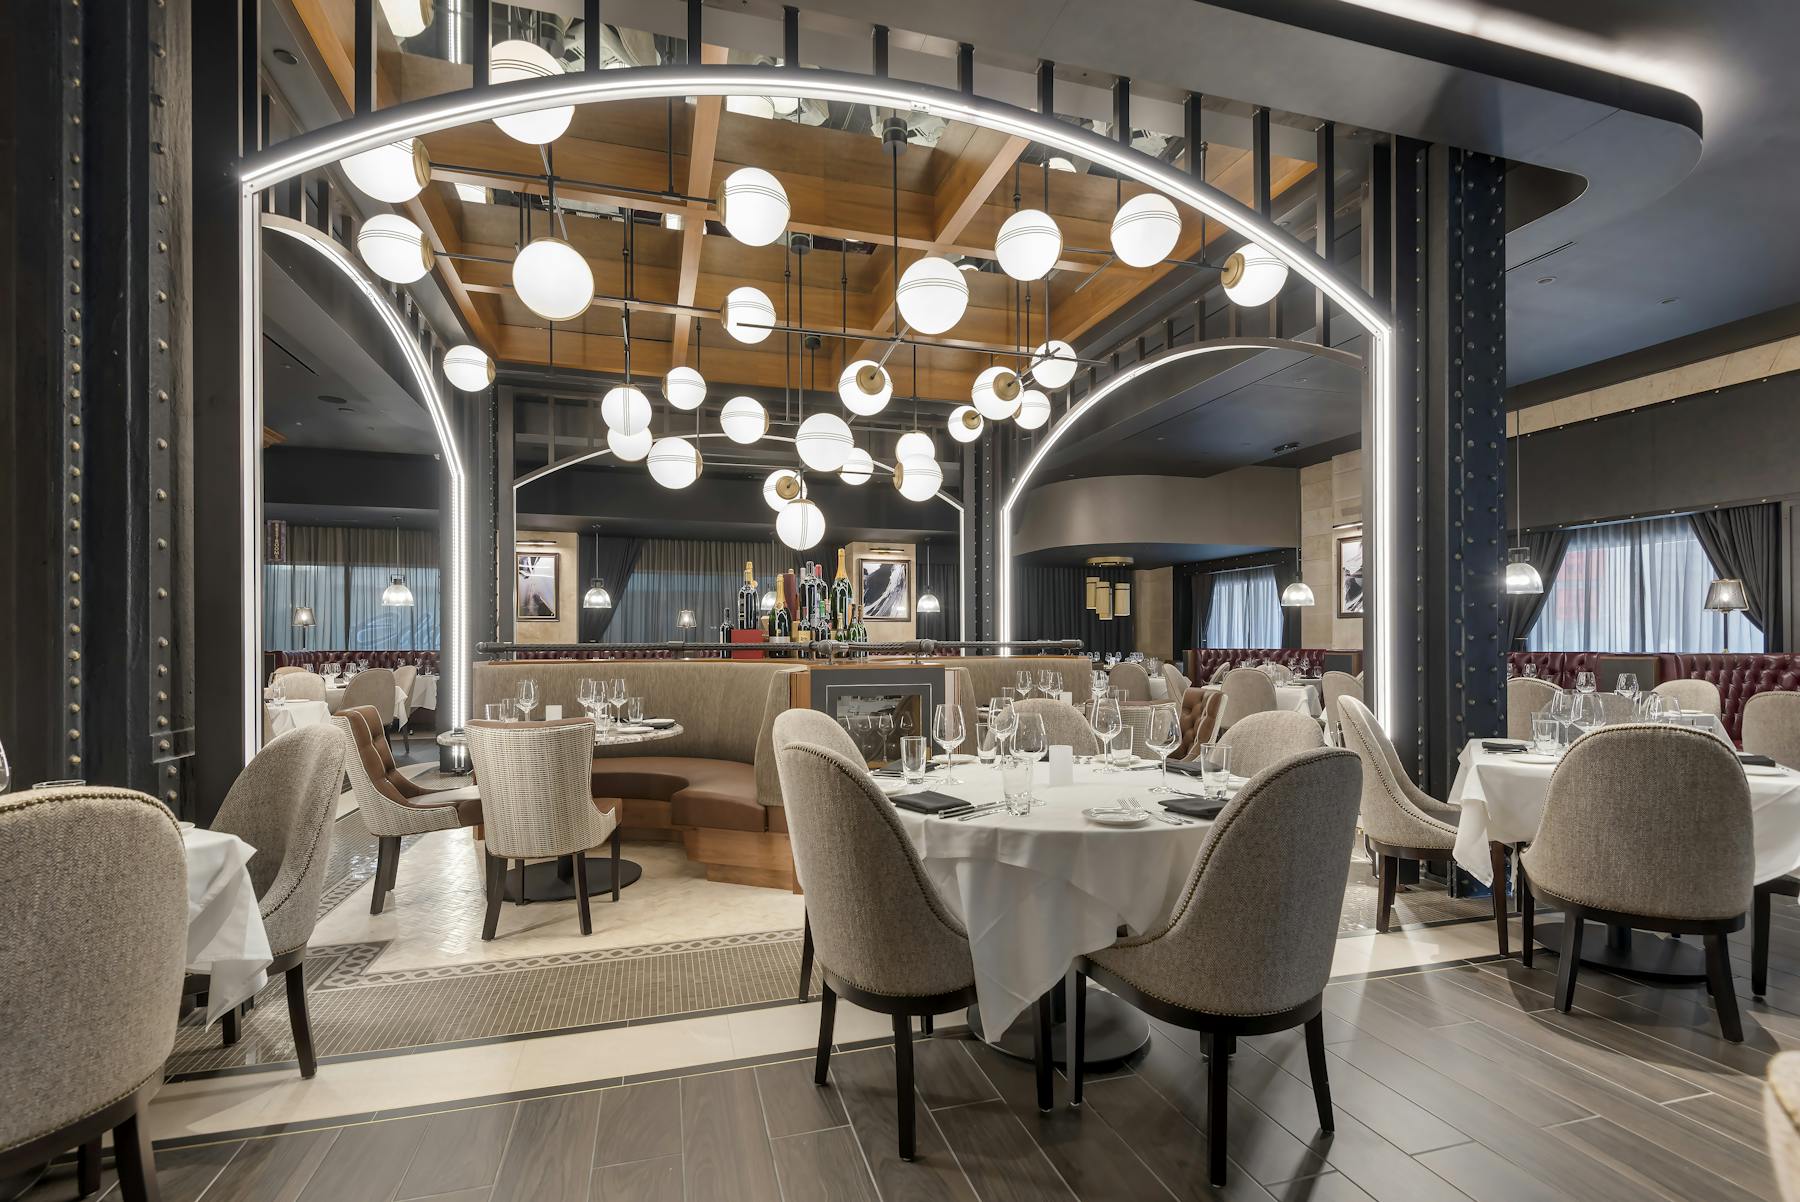 Del Frisco's Restaurant Group sells to private equity firm for $650 million